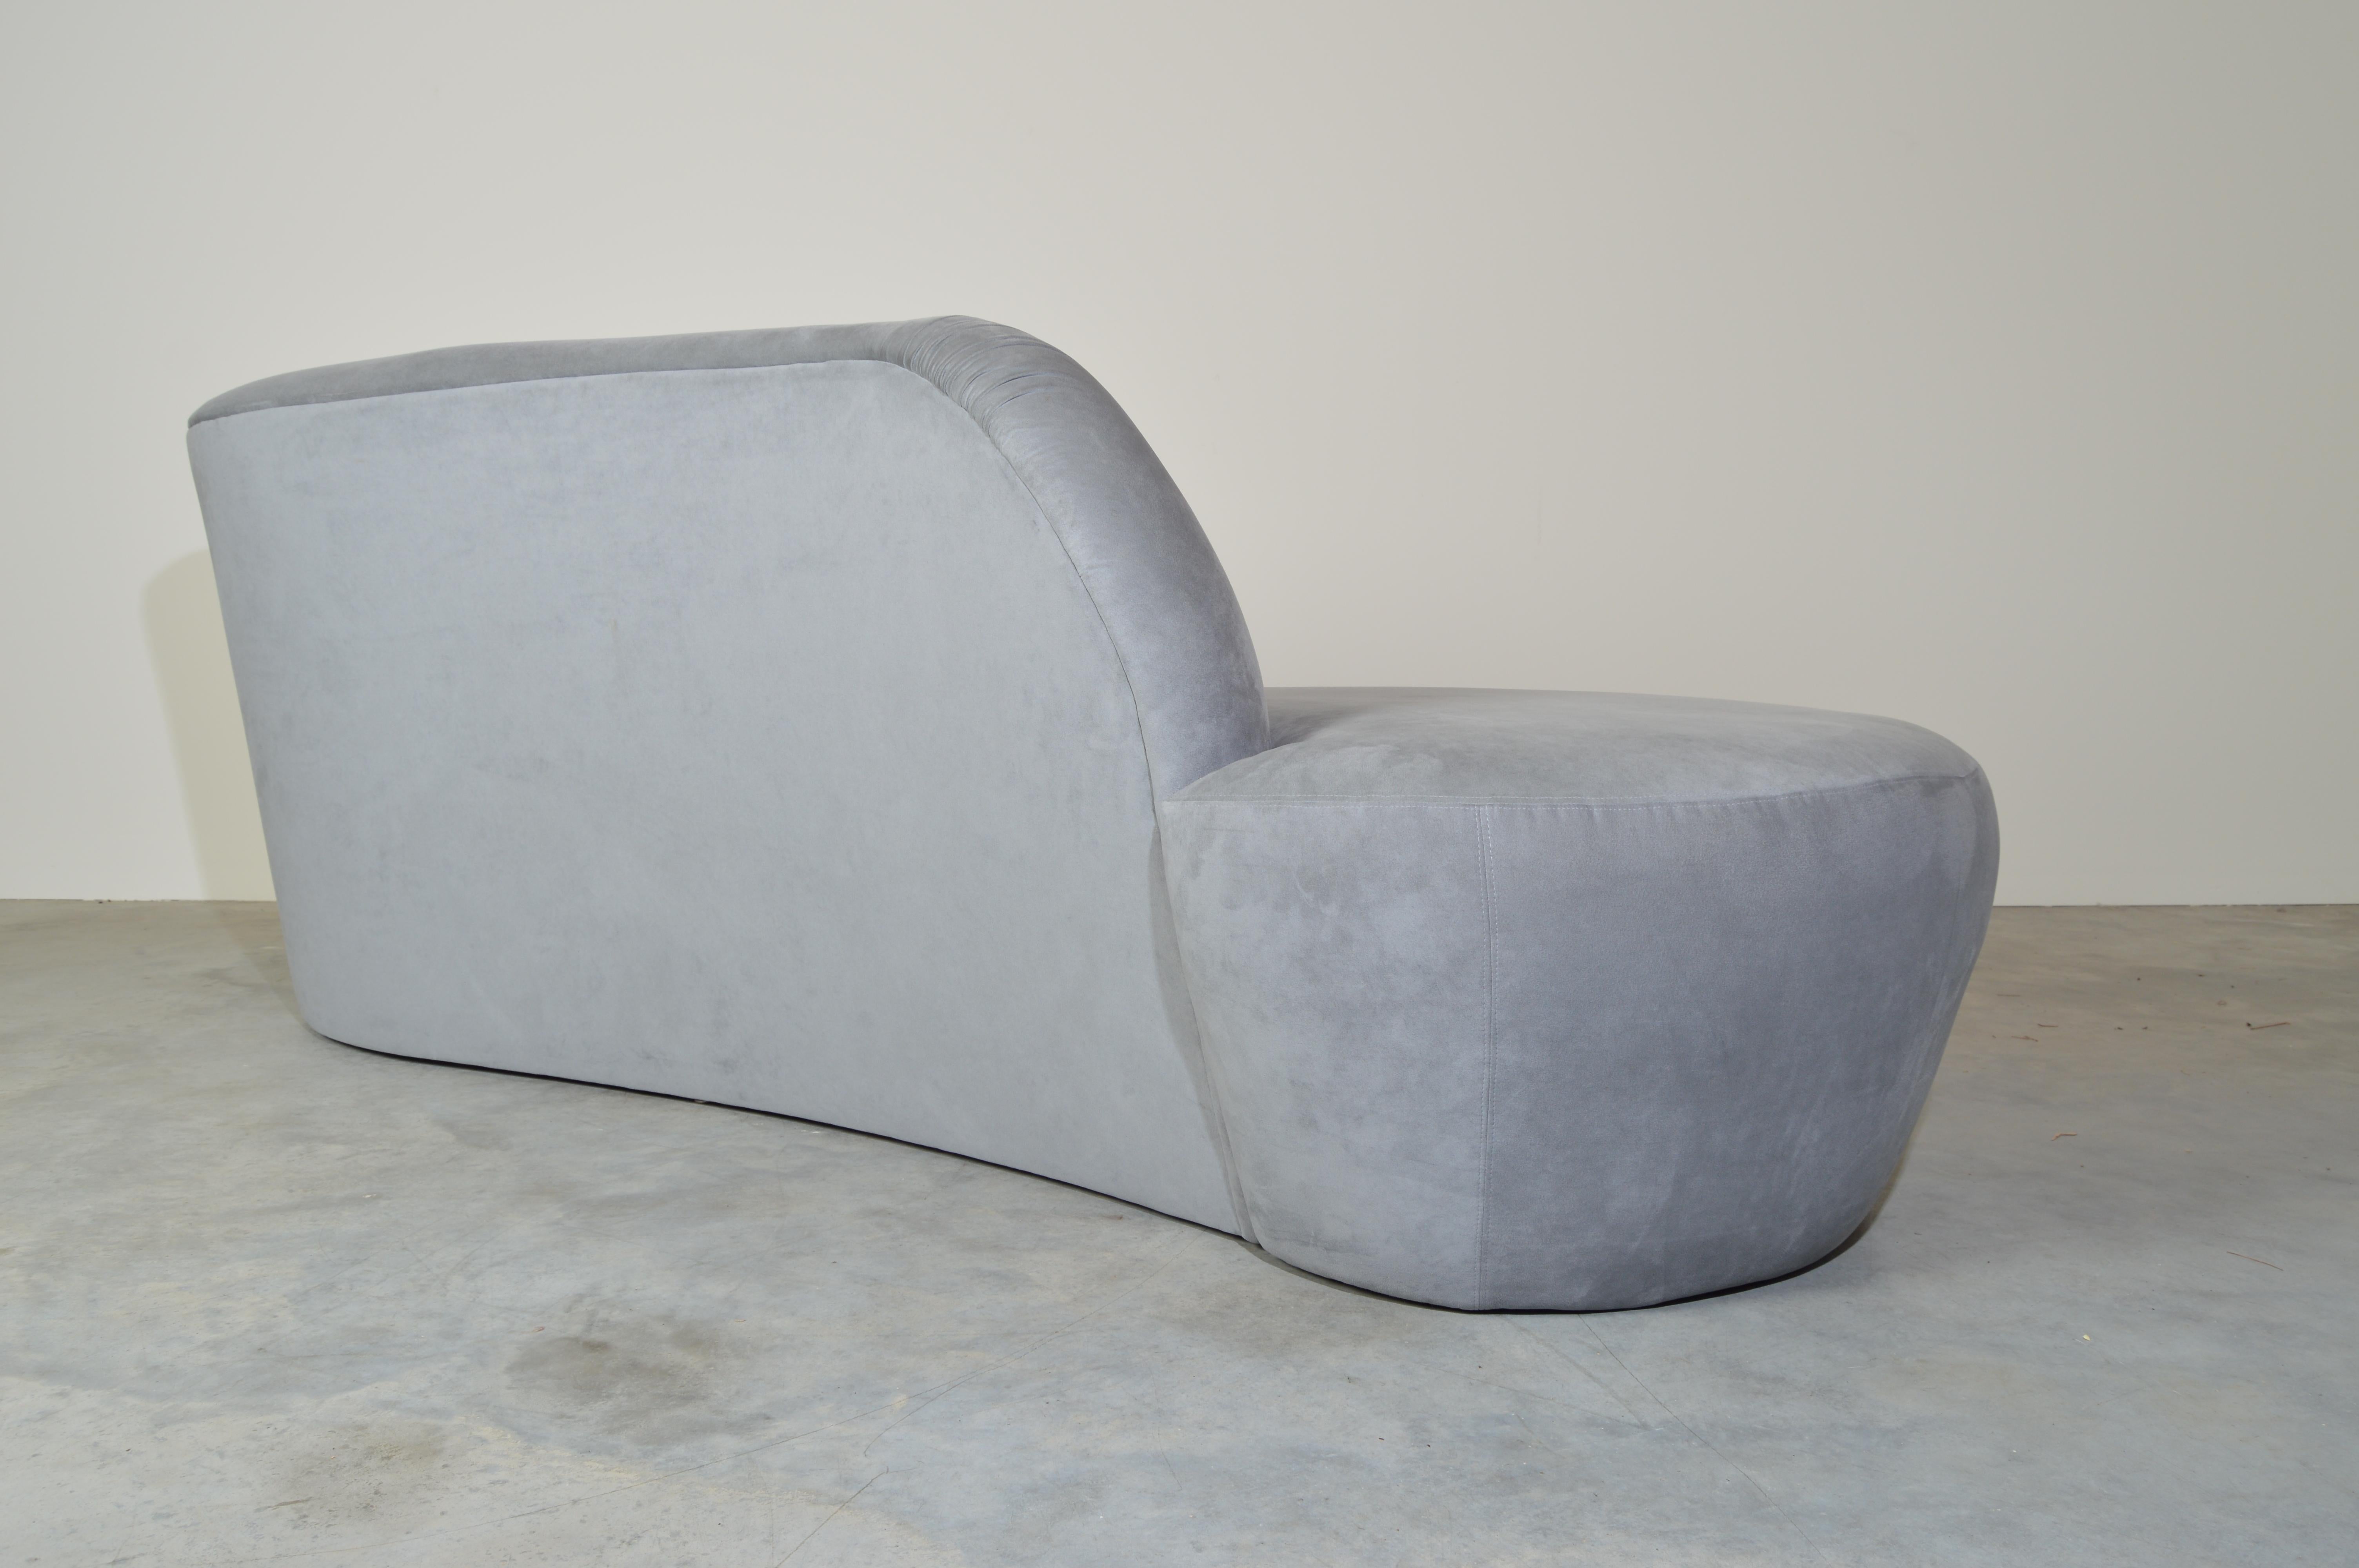 Weiman Preview Sofa Chaise Lounge with Pouf Ottoman in Ultrasuede after Kagan 1